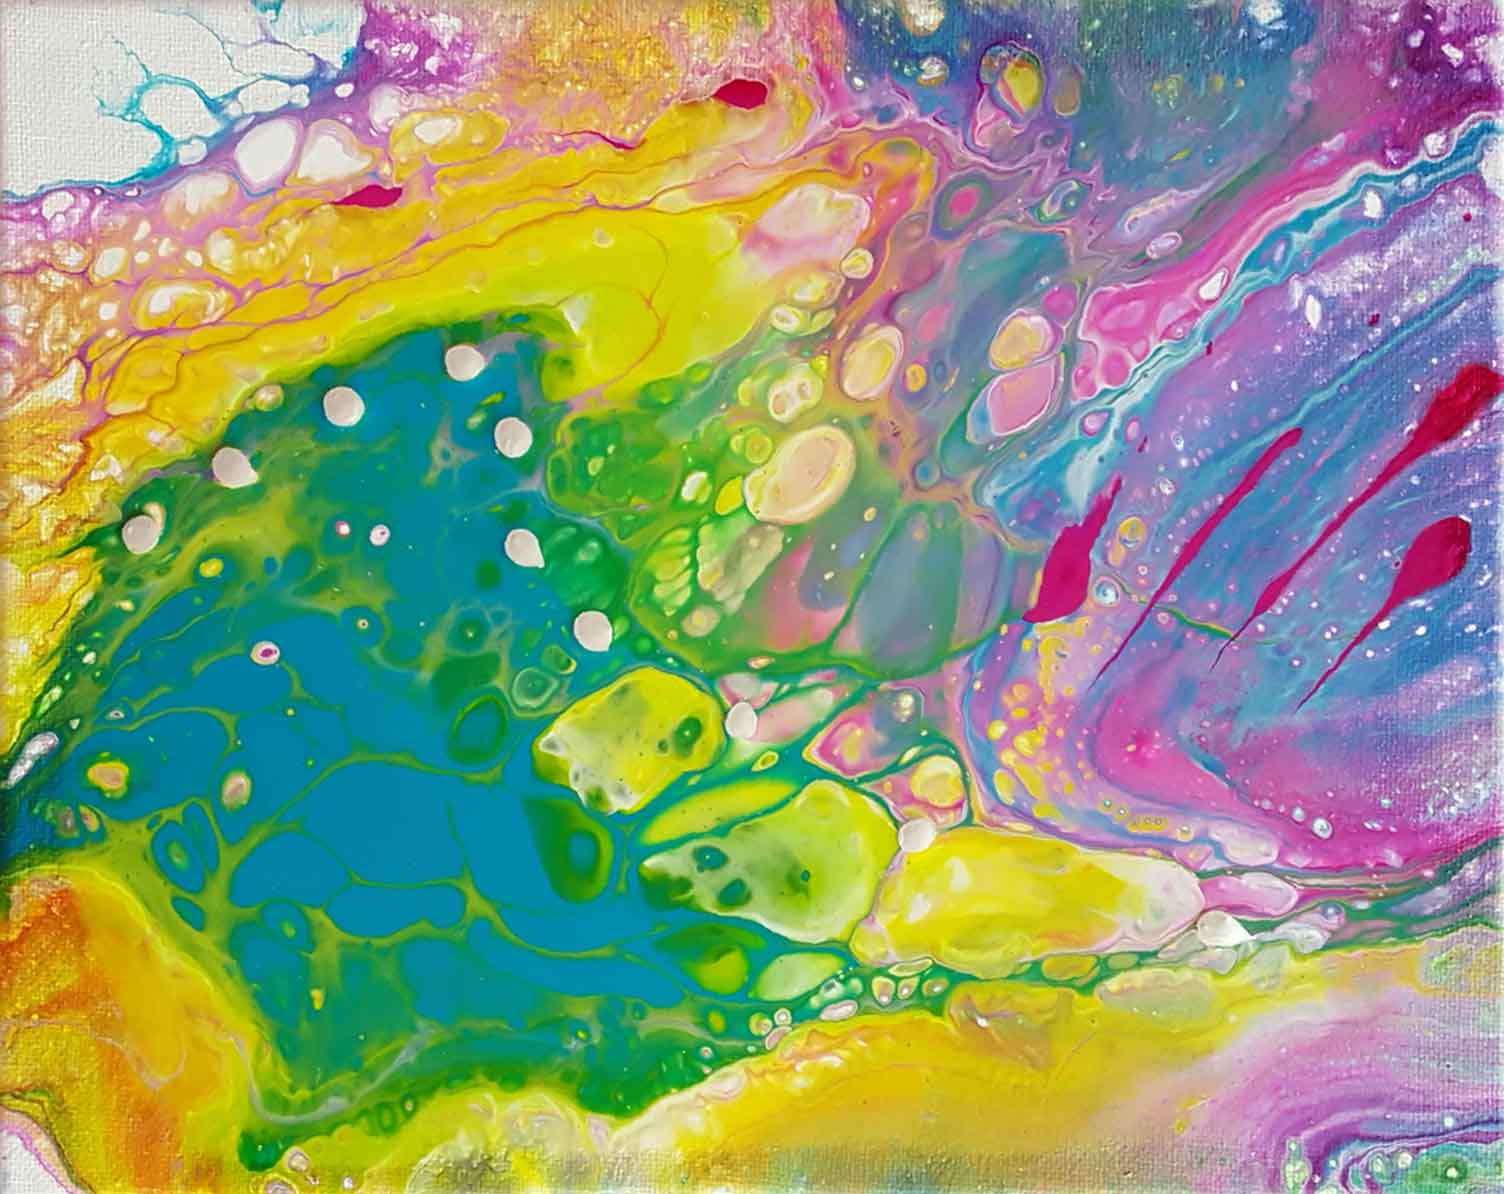 The science of pour painting